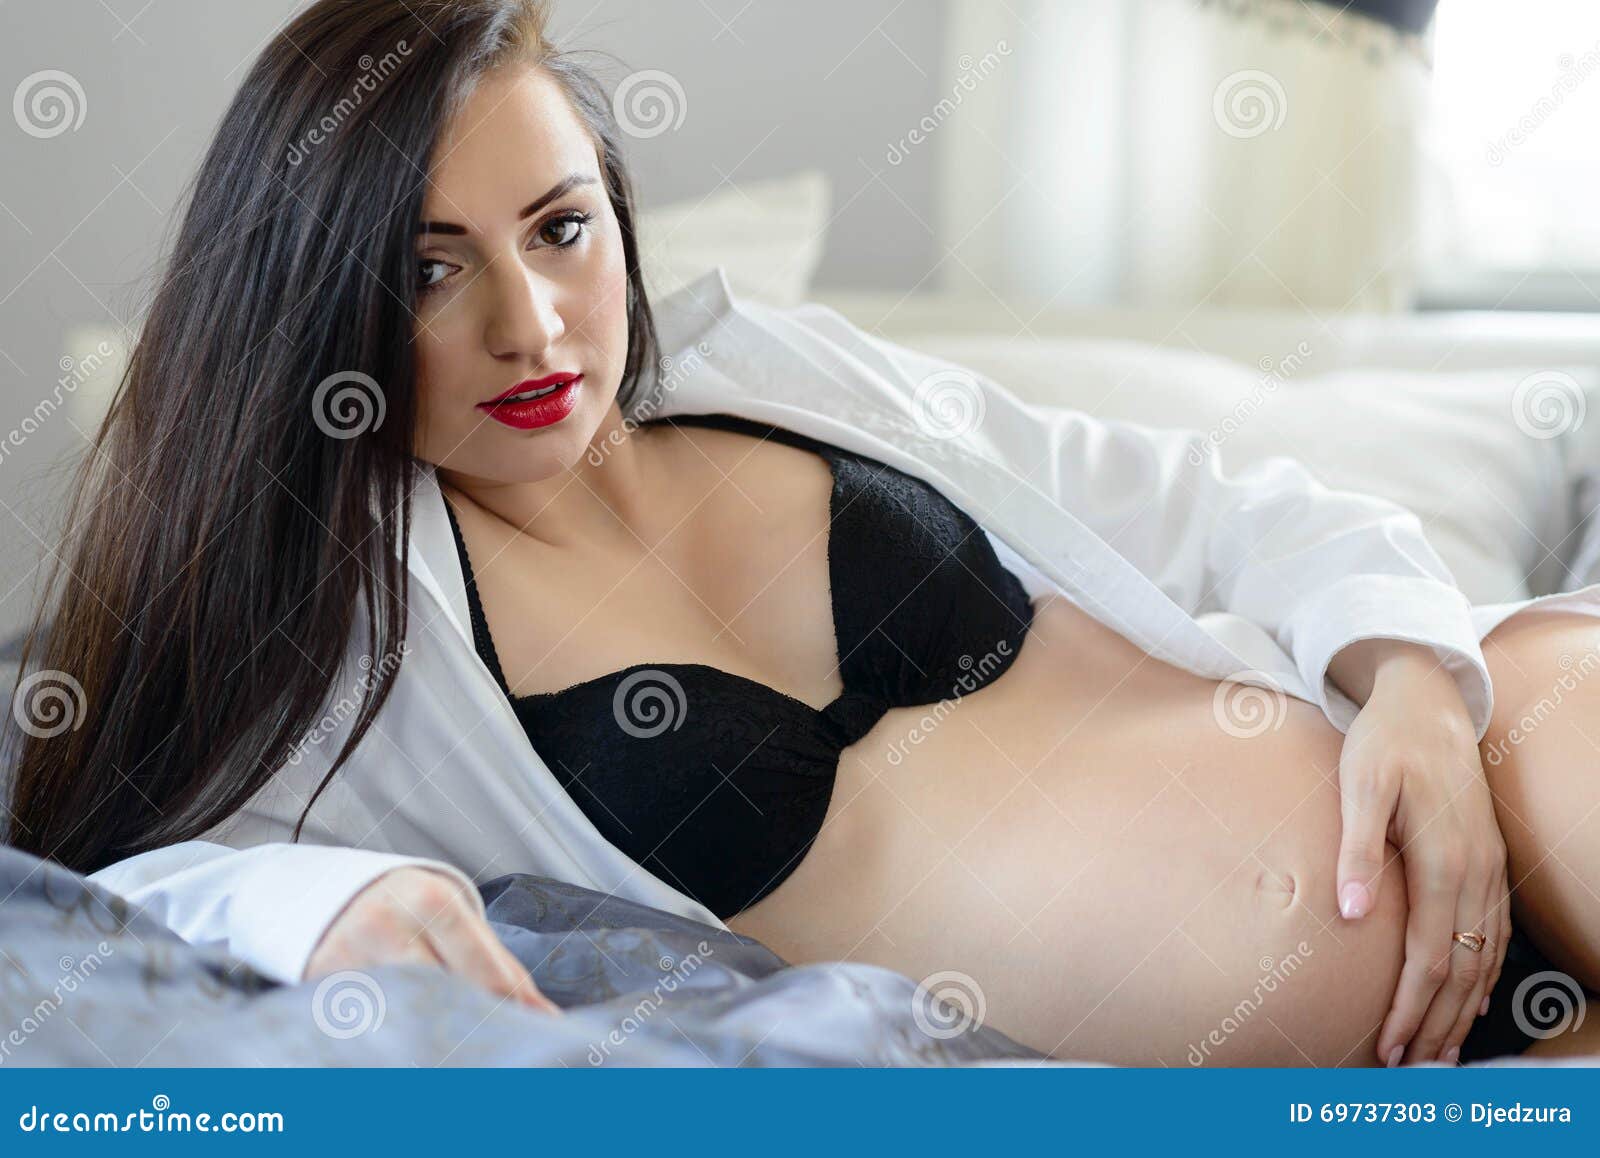 Beautiful Pregnant Woman on Bed Stock Image